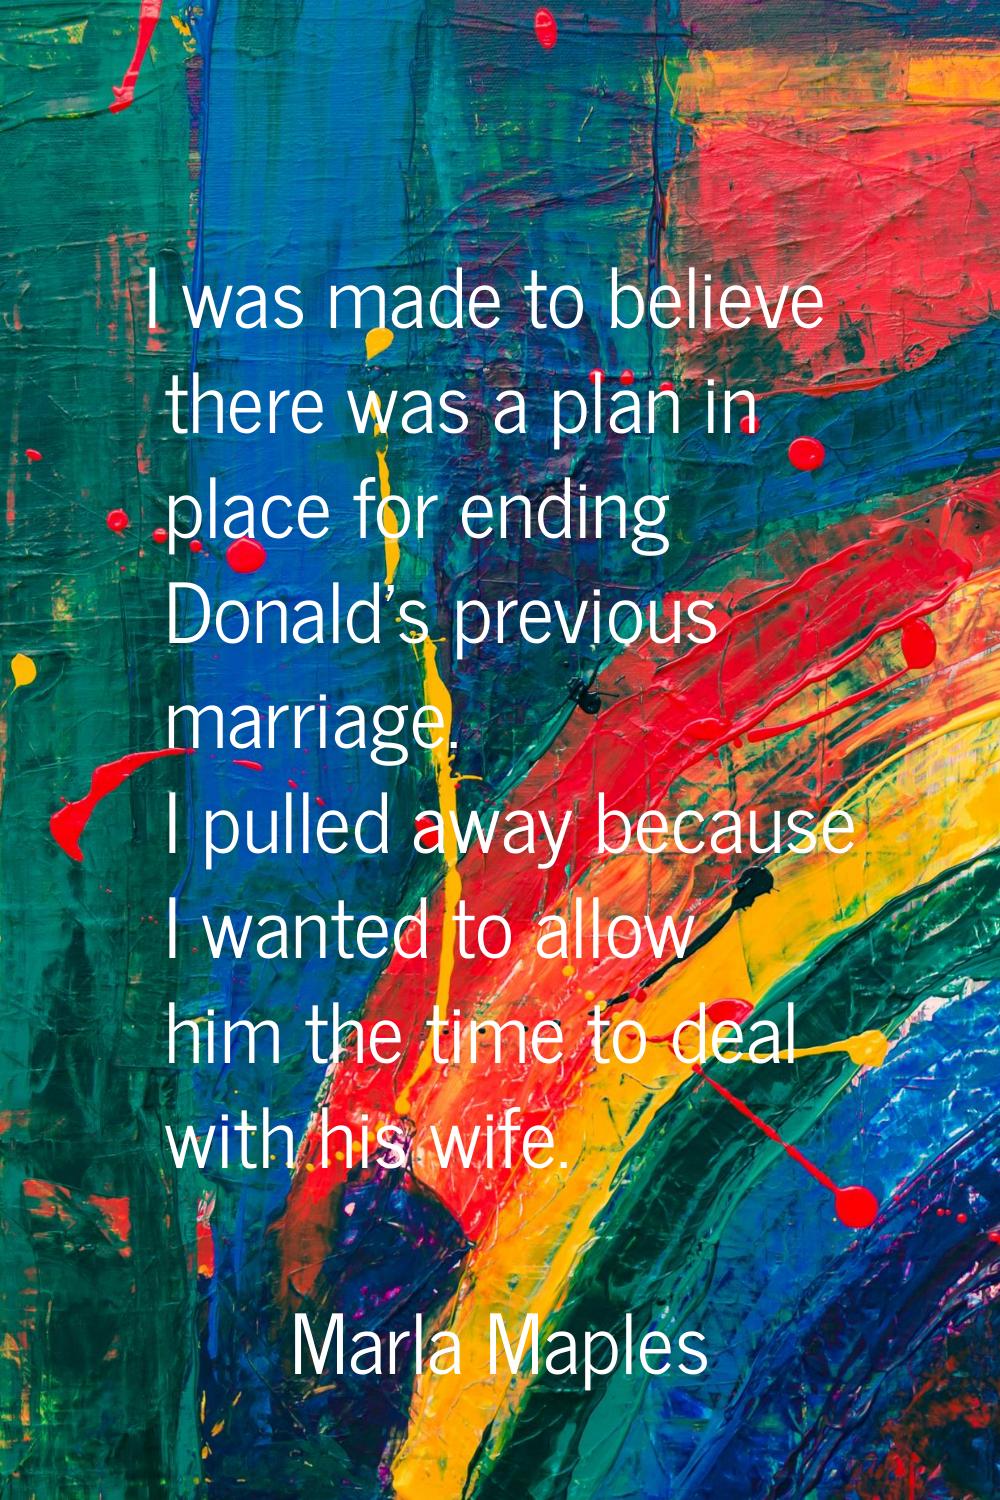 I was made to believe there was a plan in place for ending Donald's previous marriage. I pulled awa